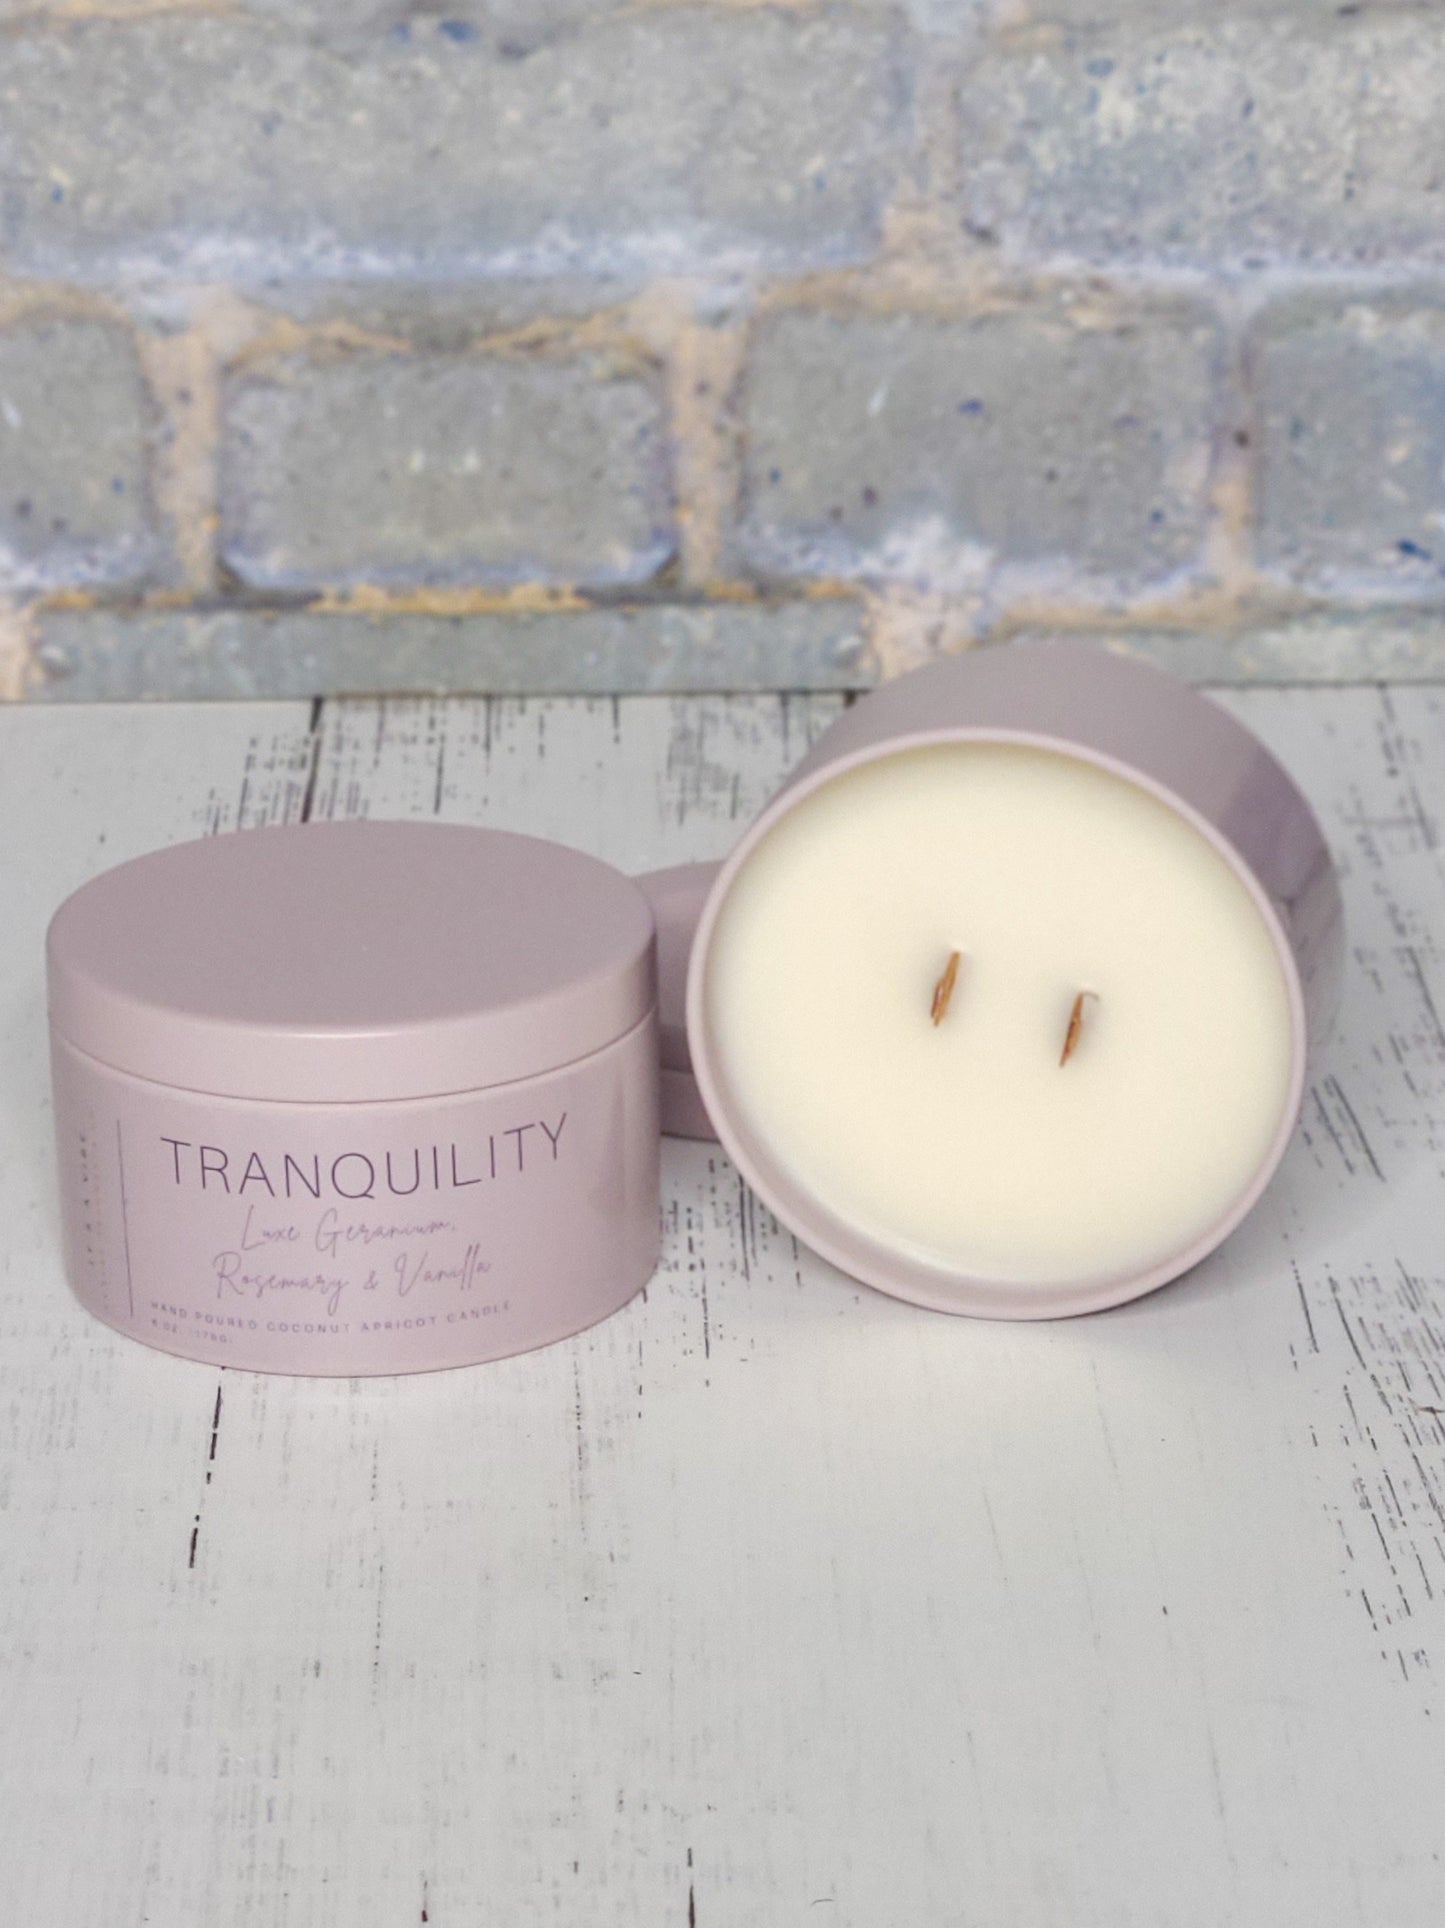 Tranquility - Luxury Travel Candle